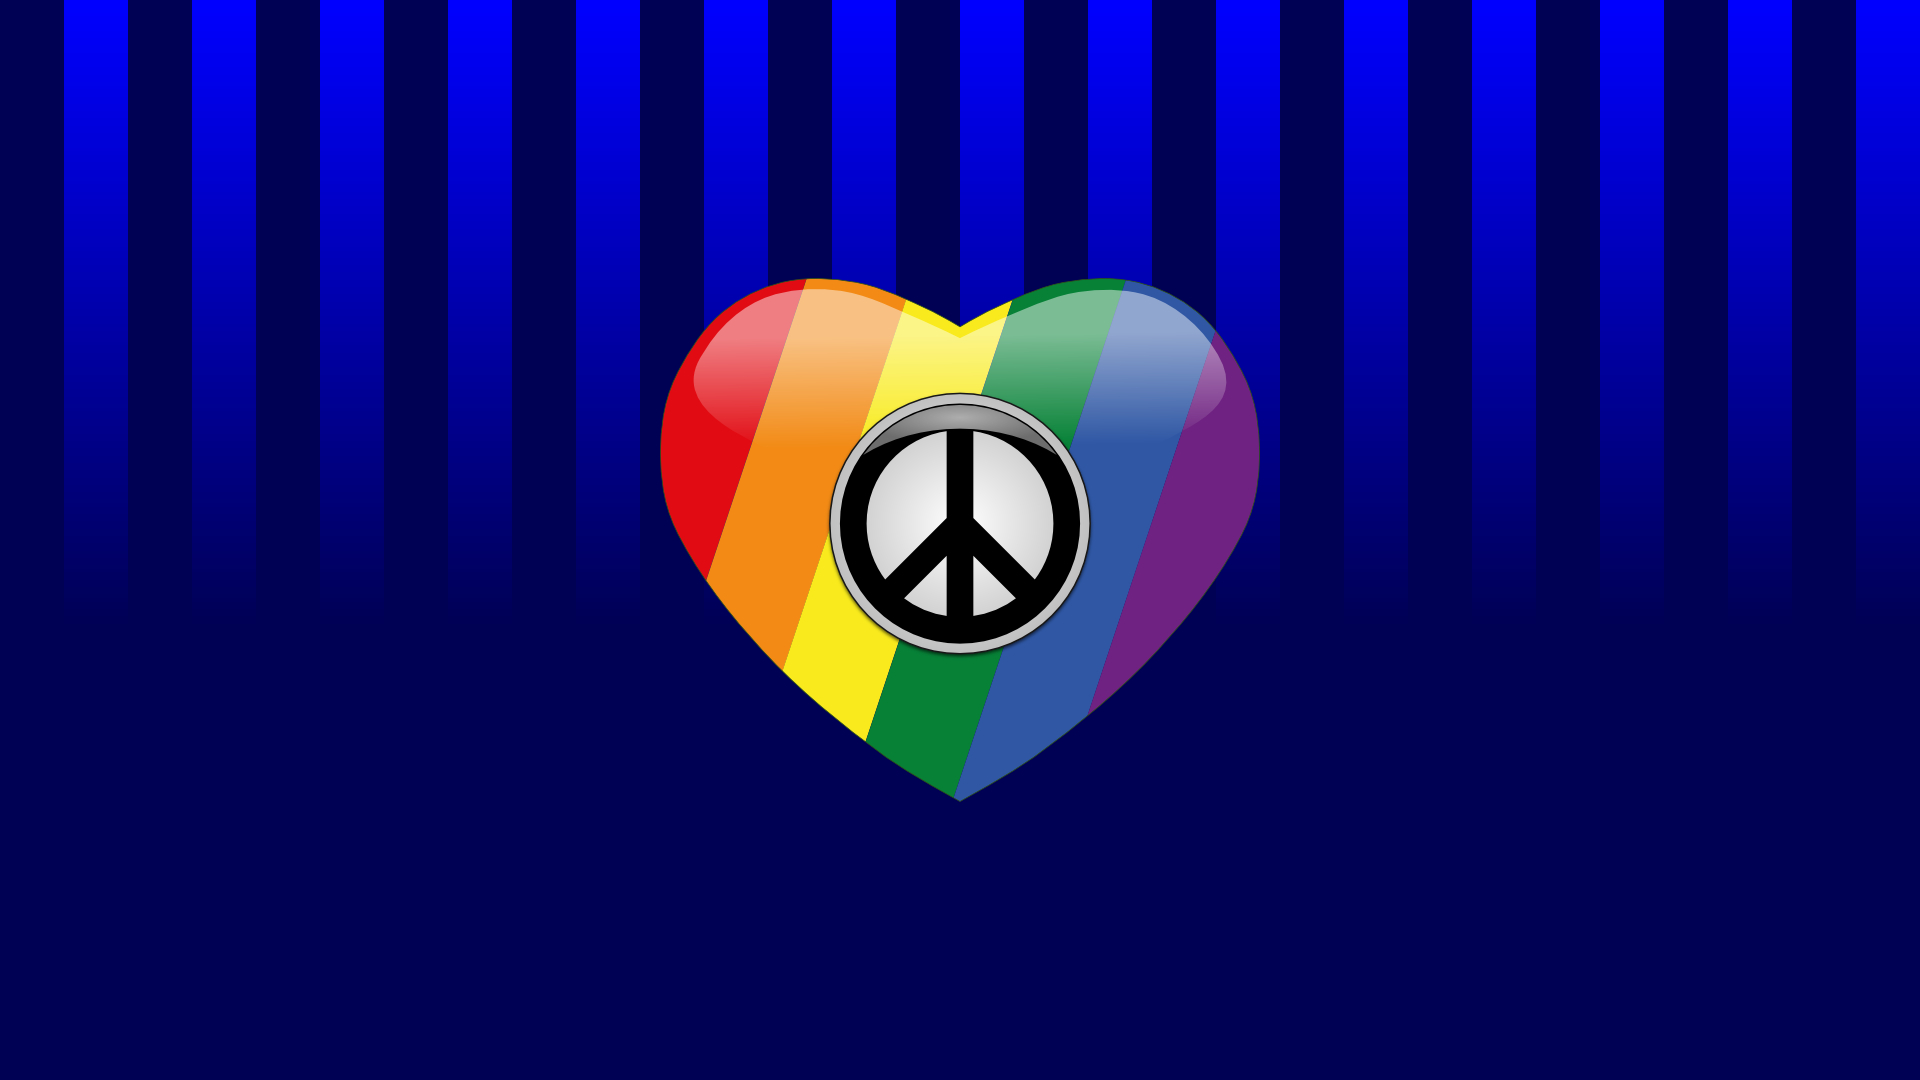 1920x1080 Pride, Peace and Love in LGHBTQ and rainbow colors! High resolution wallpaper. | High resolution wallpapers, Peace, Peace and love